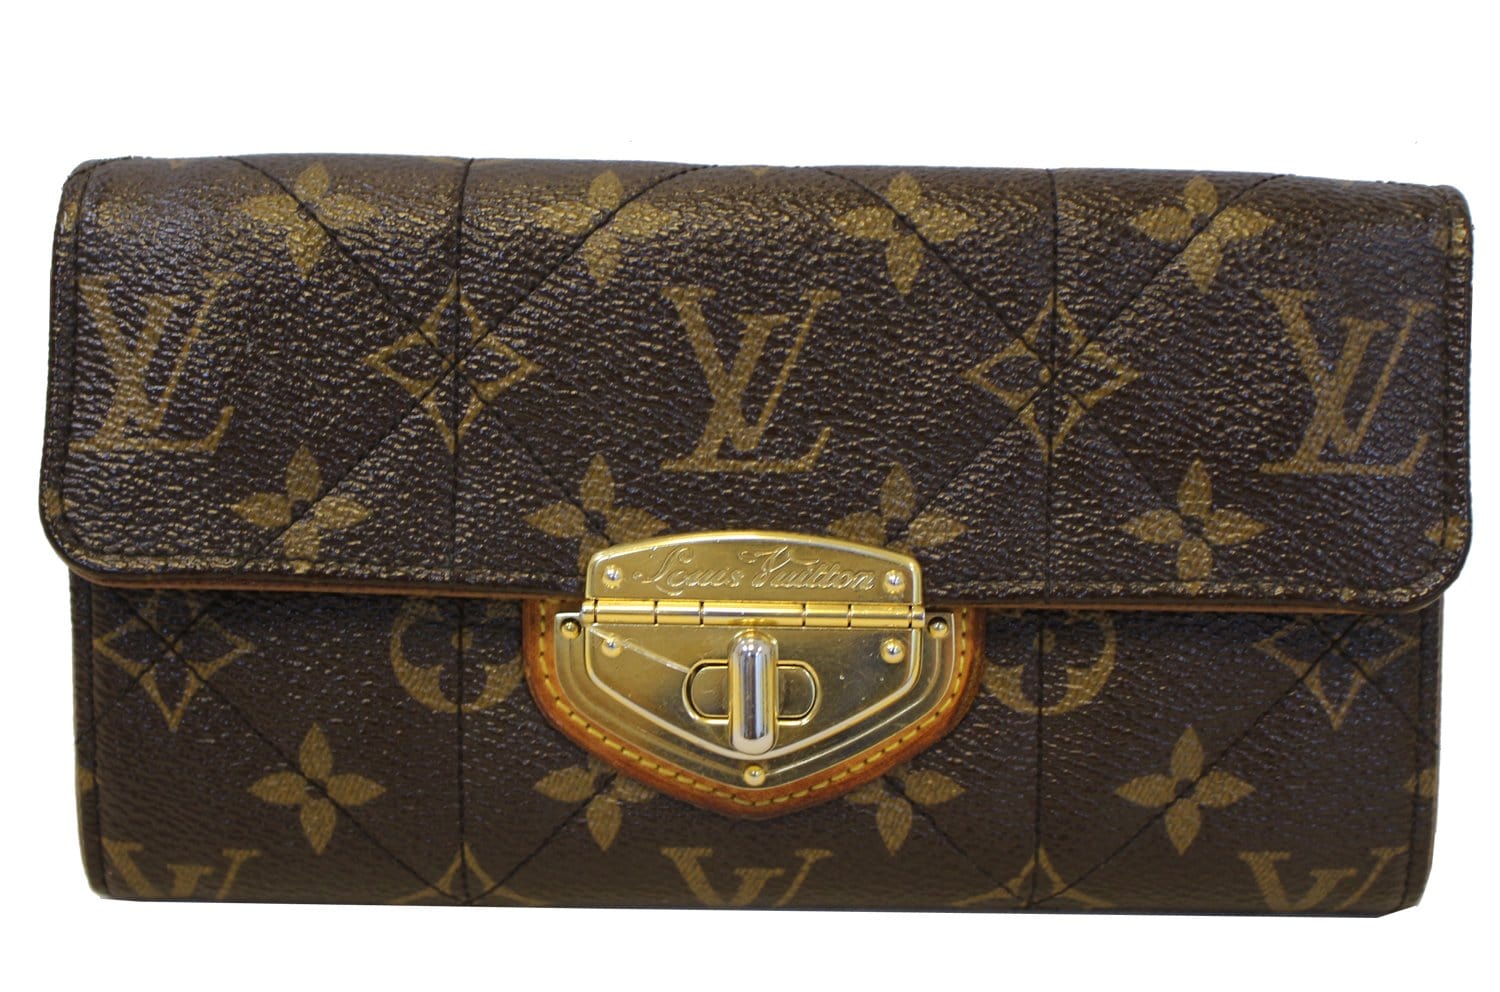 Gifts under $500 for her Louis Vuitton, Givenchy, Restoration